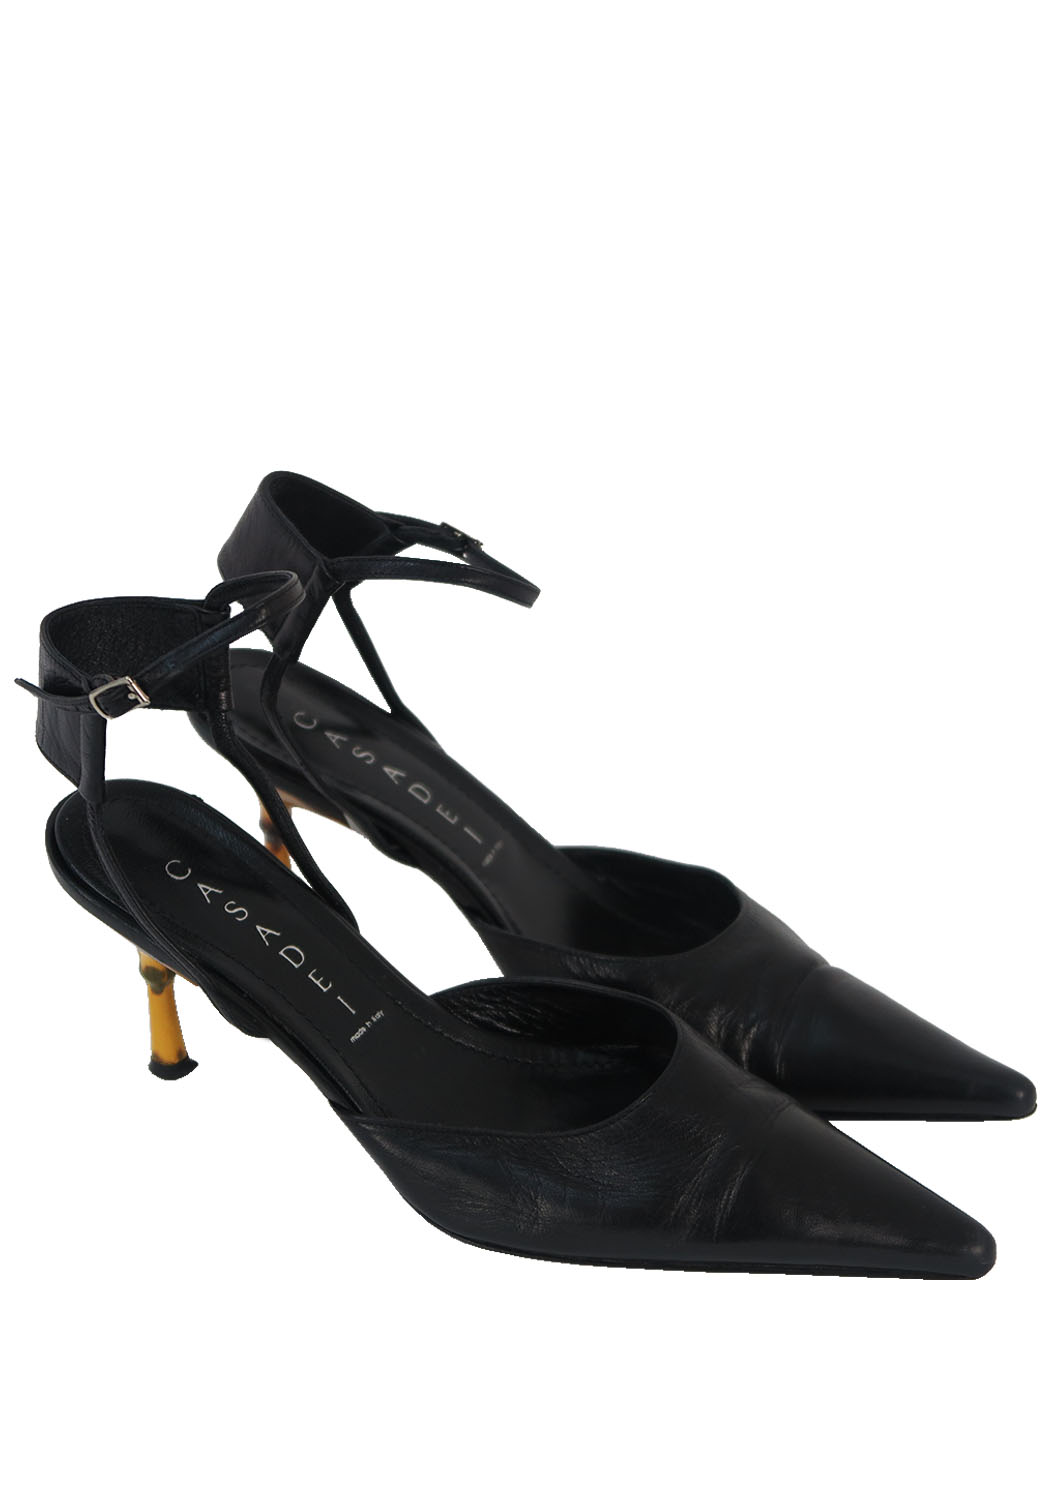 black pointed toe shoes